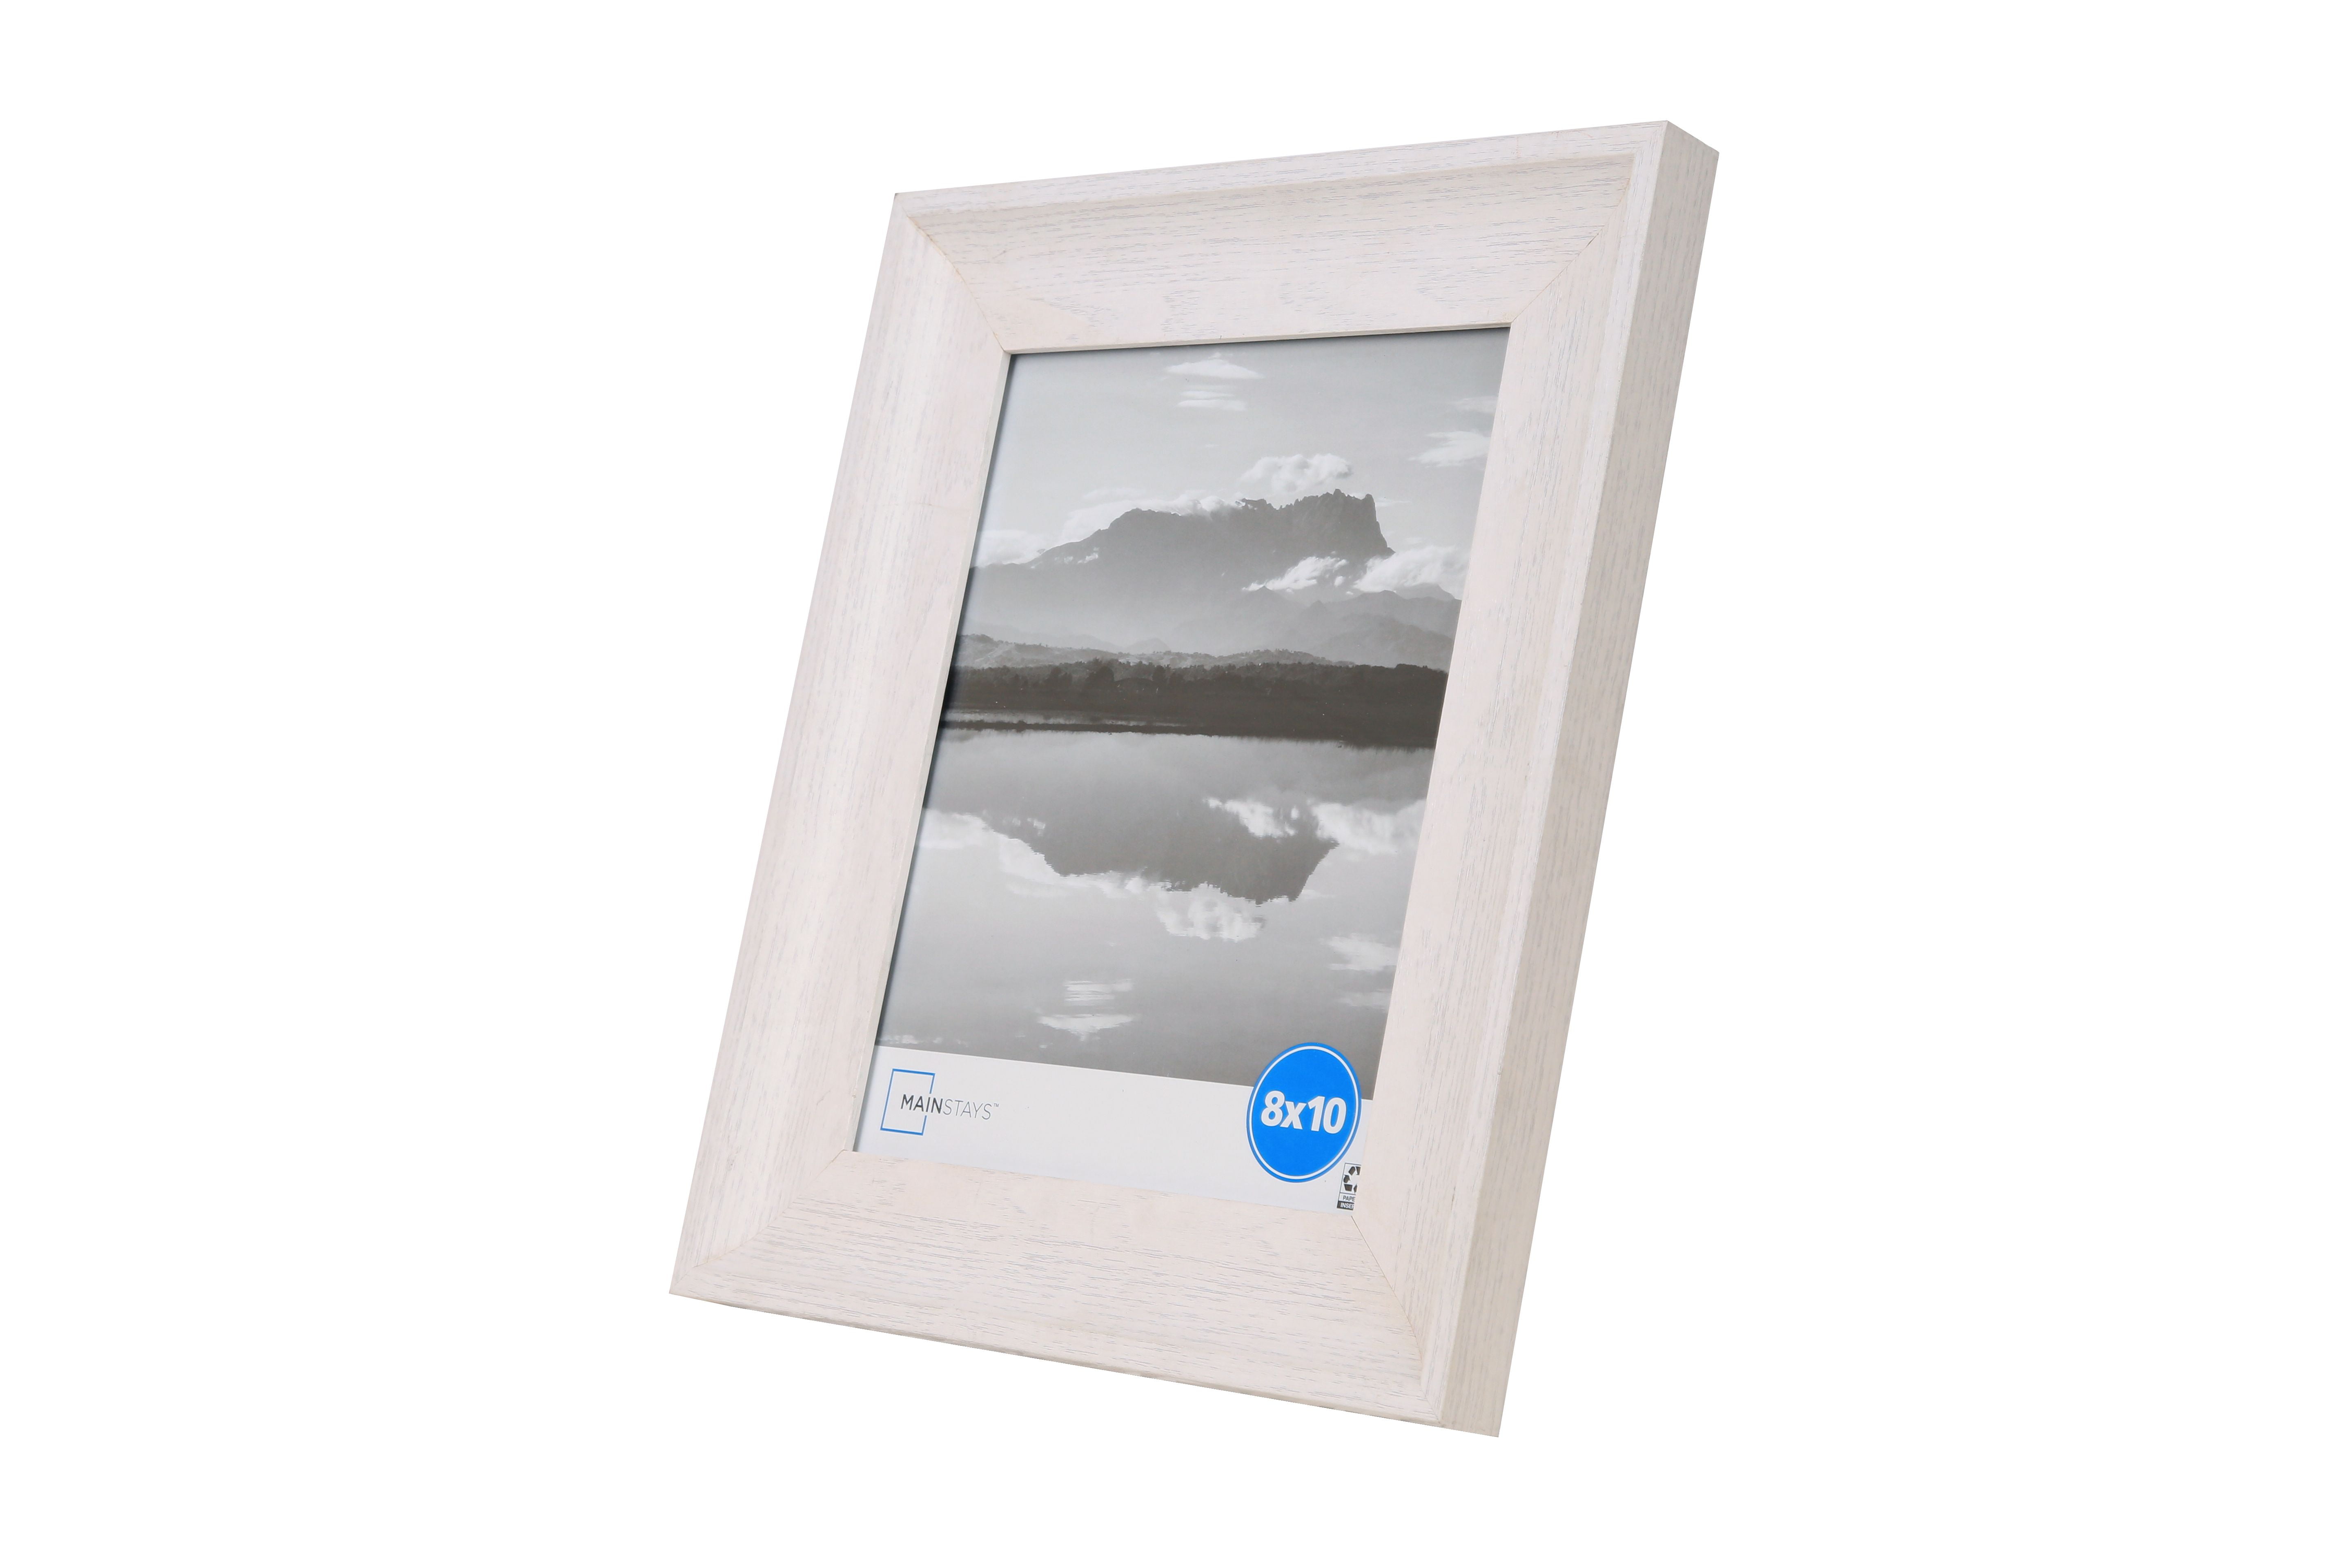  Monolike Paper Photo Frames 8x10 Inch White 10 Pack - Fits  8x10 Pictures